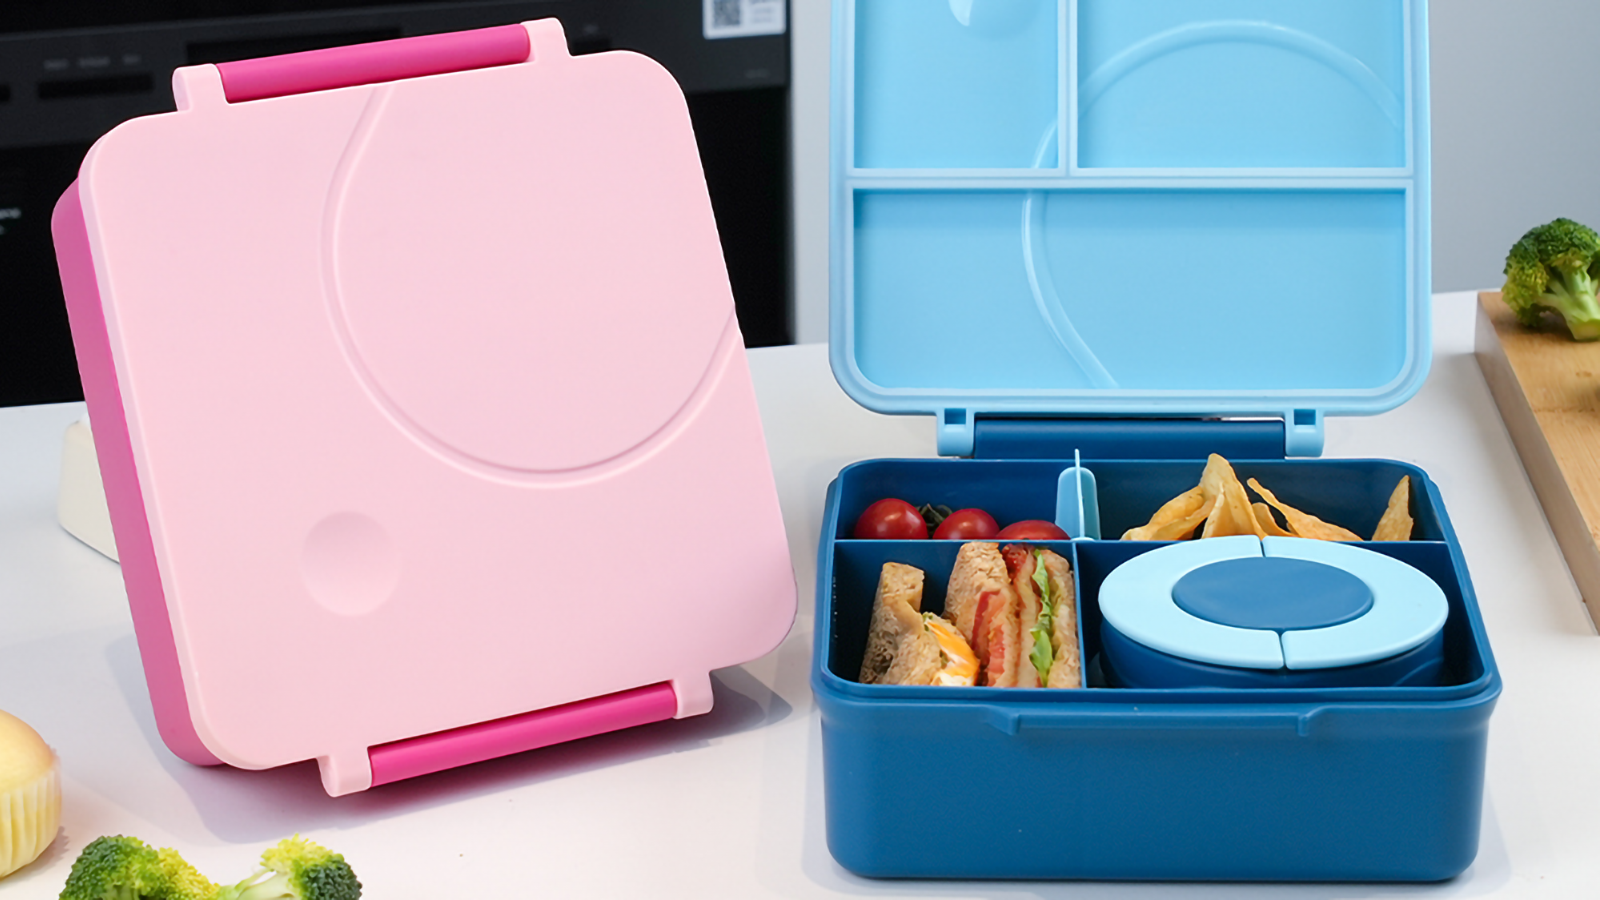 Introducing: The Thermo Bento Box